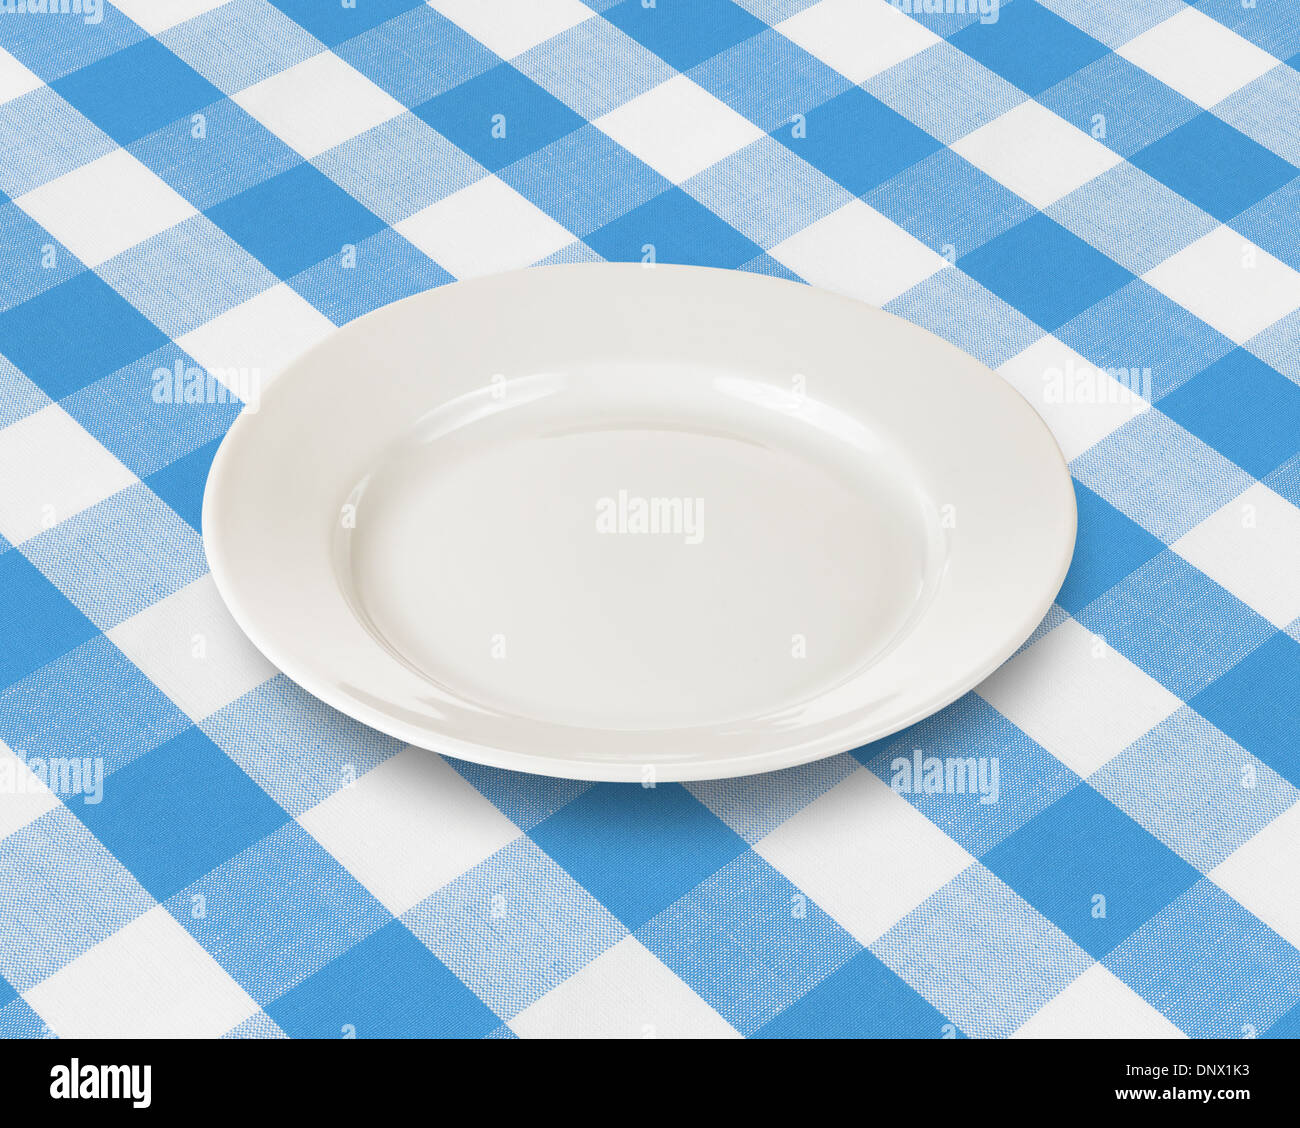 plate or dish over blue checked fabric tablecloth Stock Photo